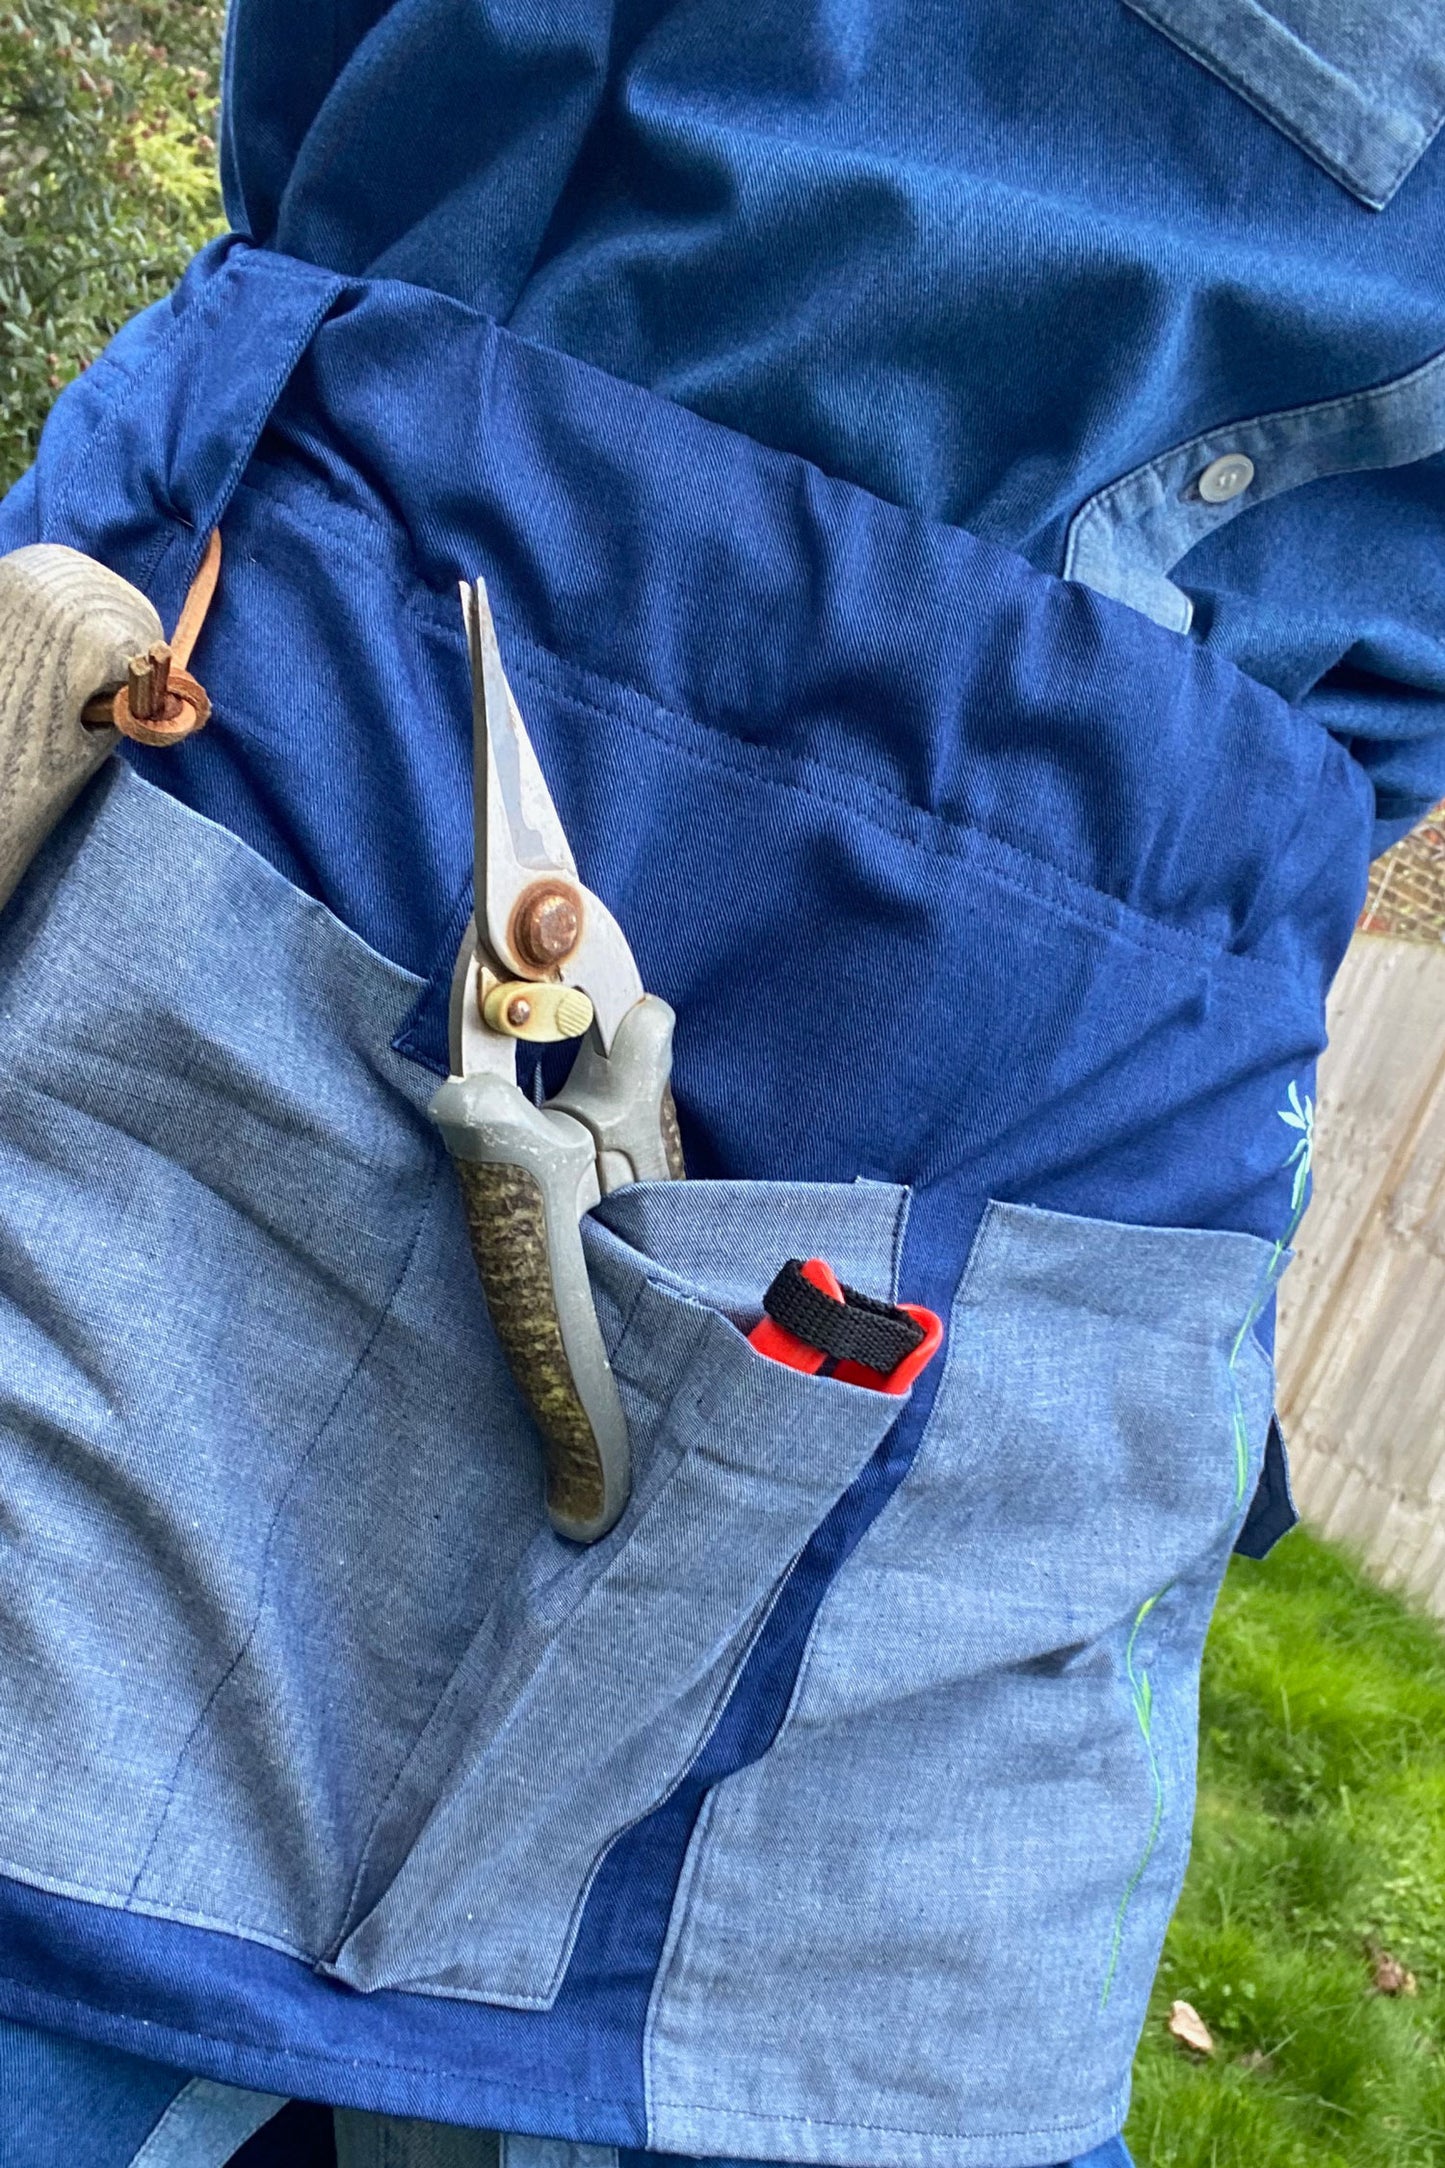 Tool Belt made in Japanese Denim, for the garden or multifunctional, by Saywood. Tool belt is being worn in the garden with gardener's tools in the pockets.